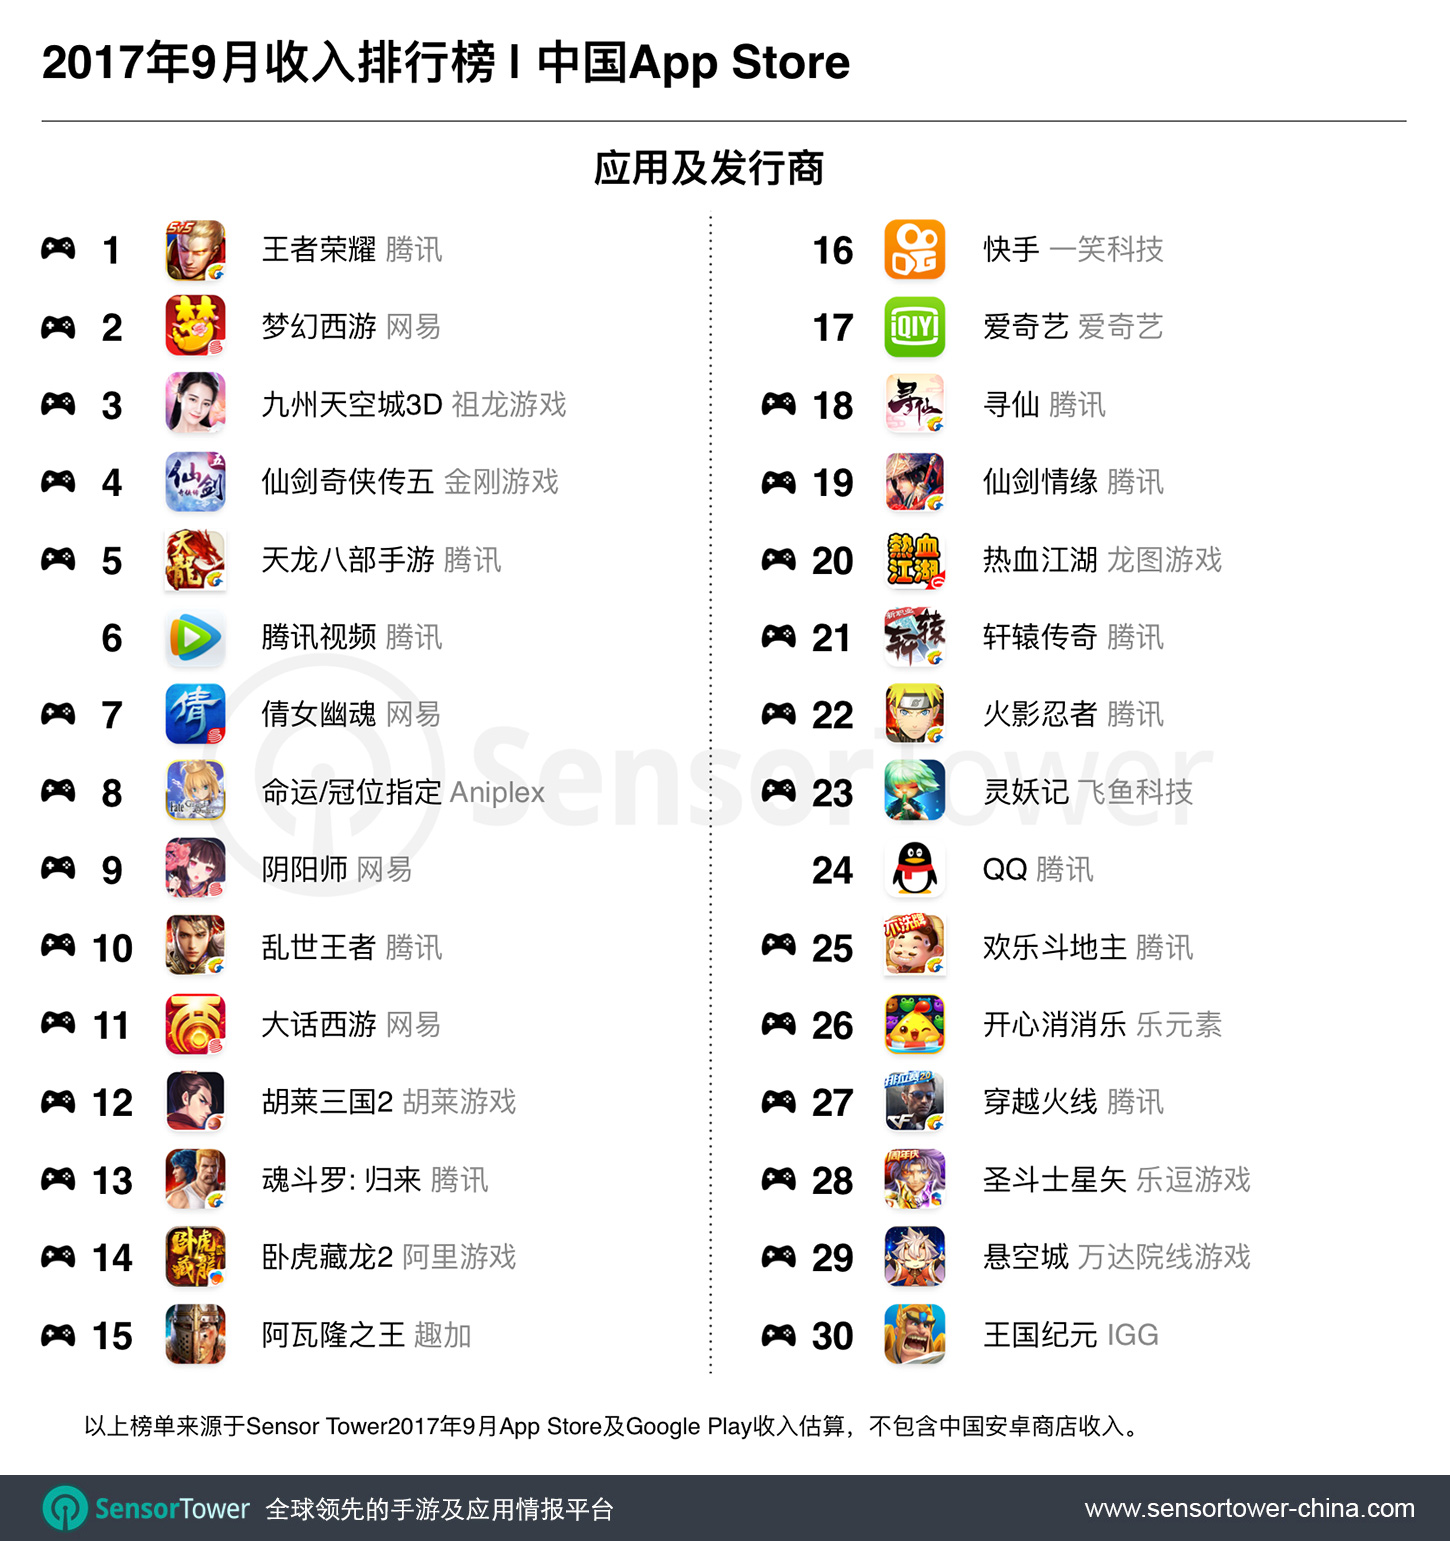 Chinese top 30 iOS apps by revenue for September 2017